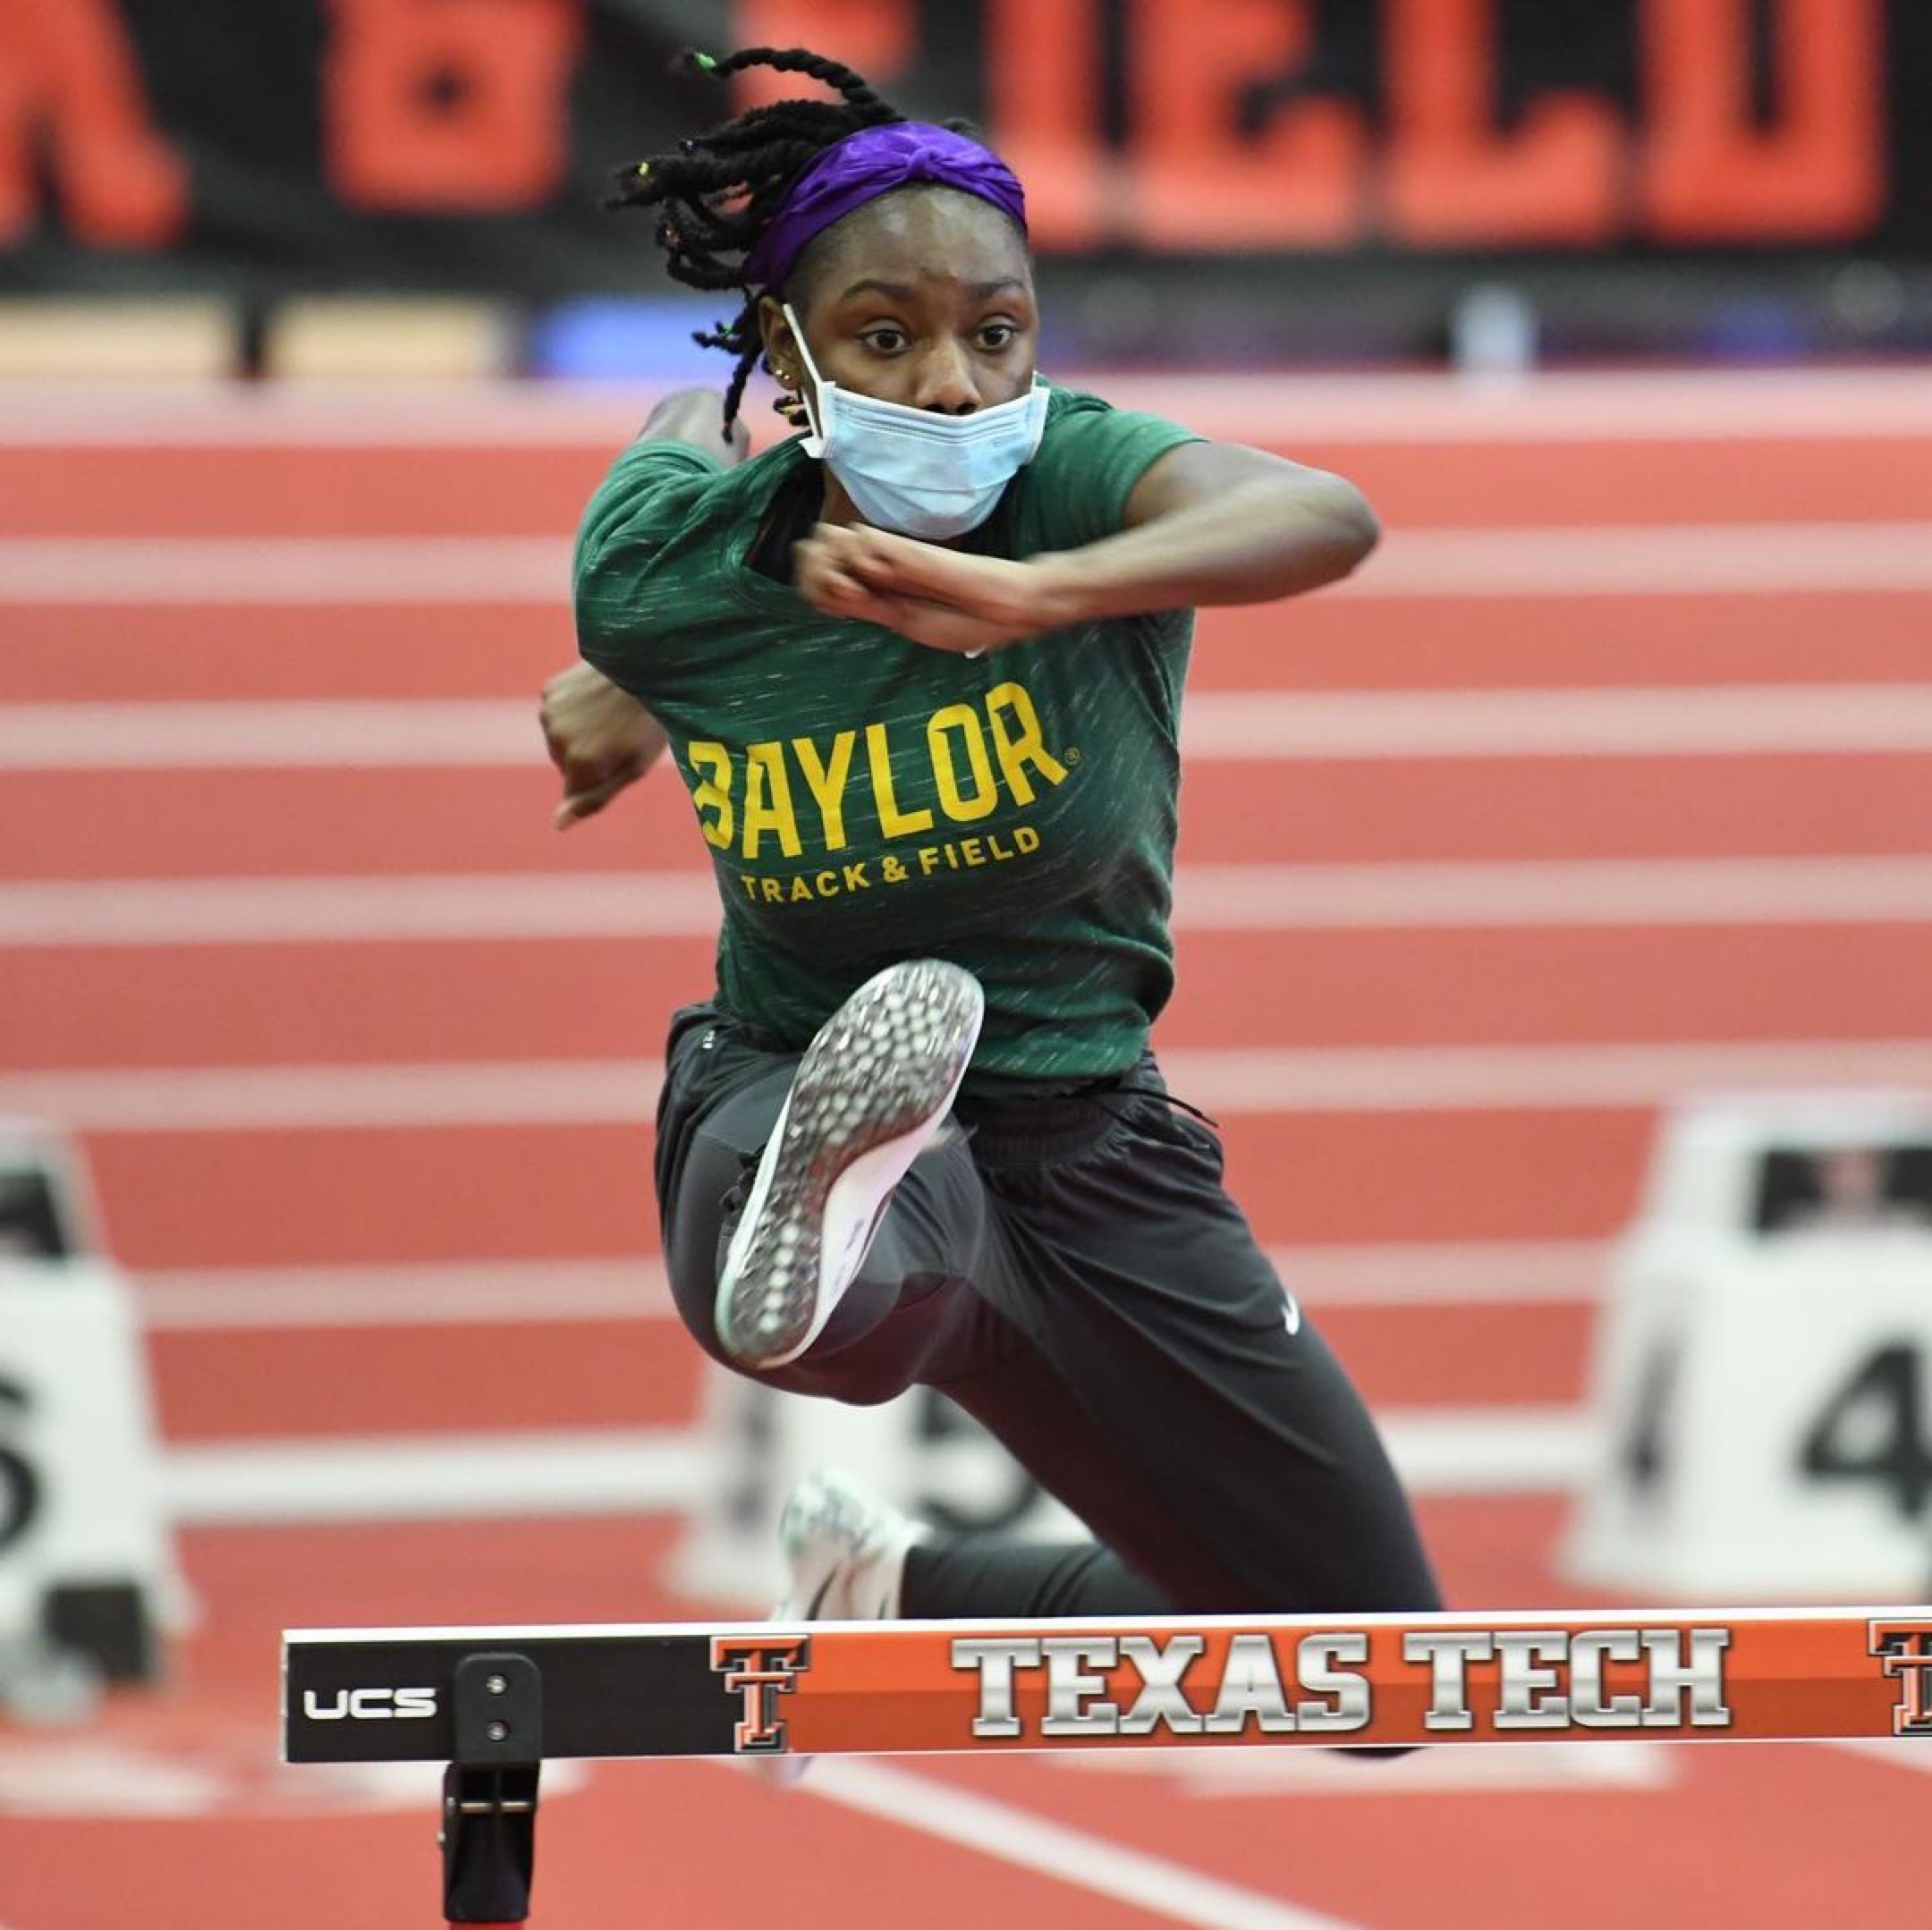 10 Jamaican women in action on Day 2 at NCAA Outdoor Championships